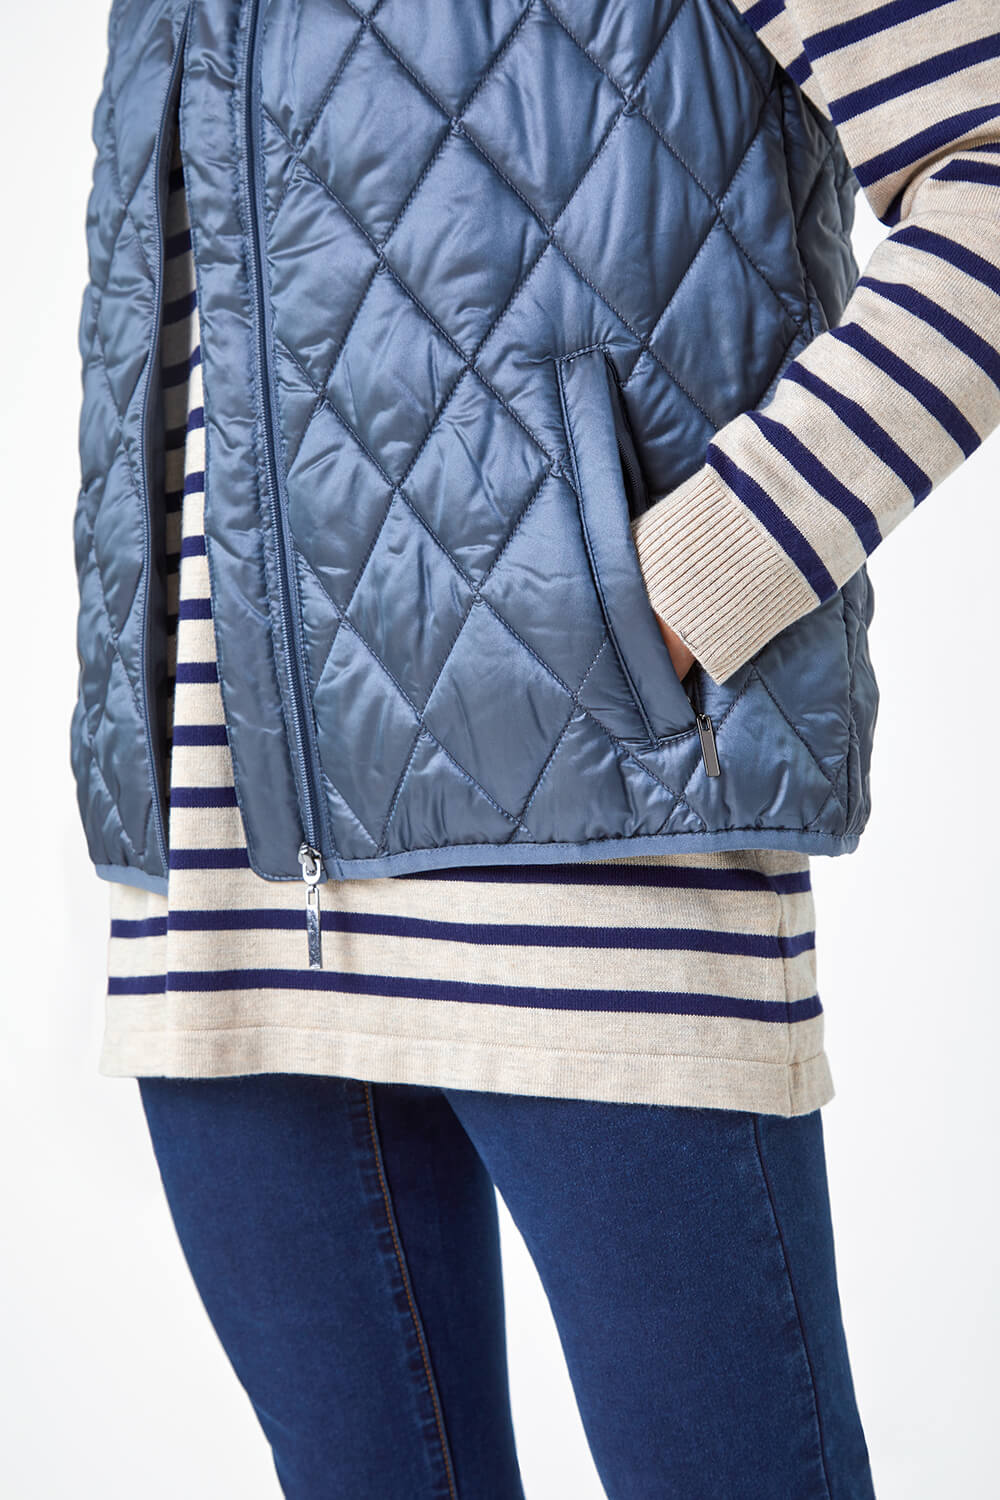 Steel Blue Petite Hooded Quilted Gilet, Image 5 of 5